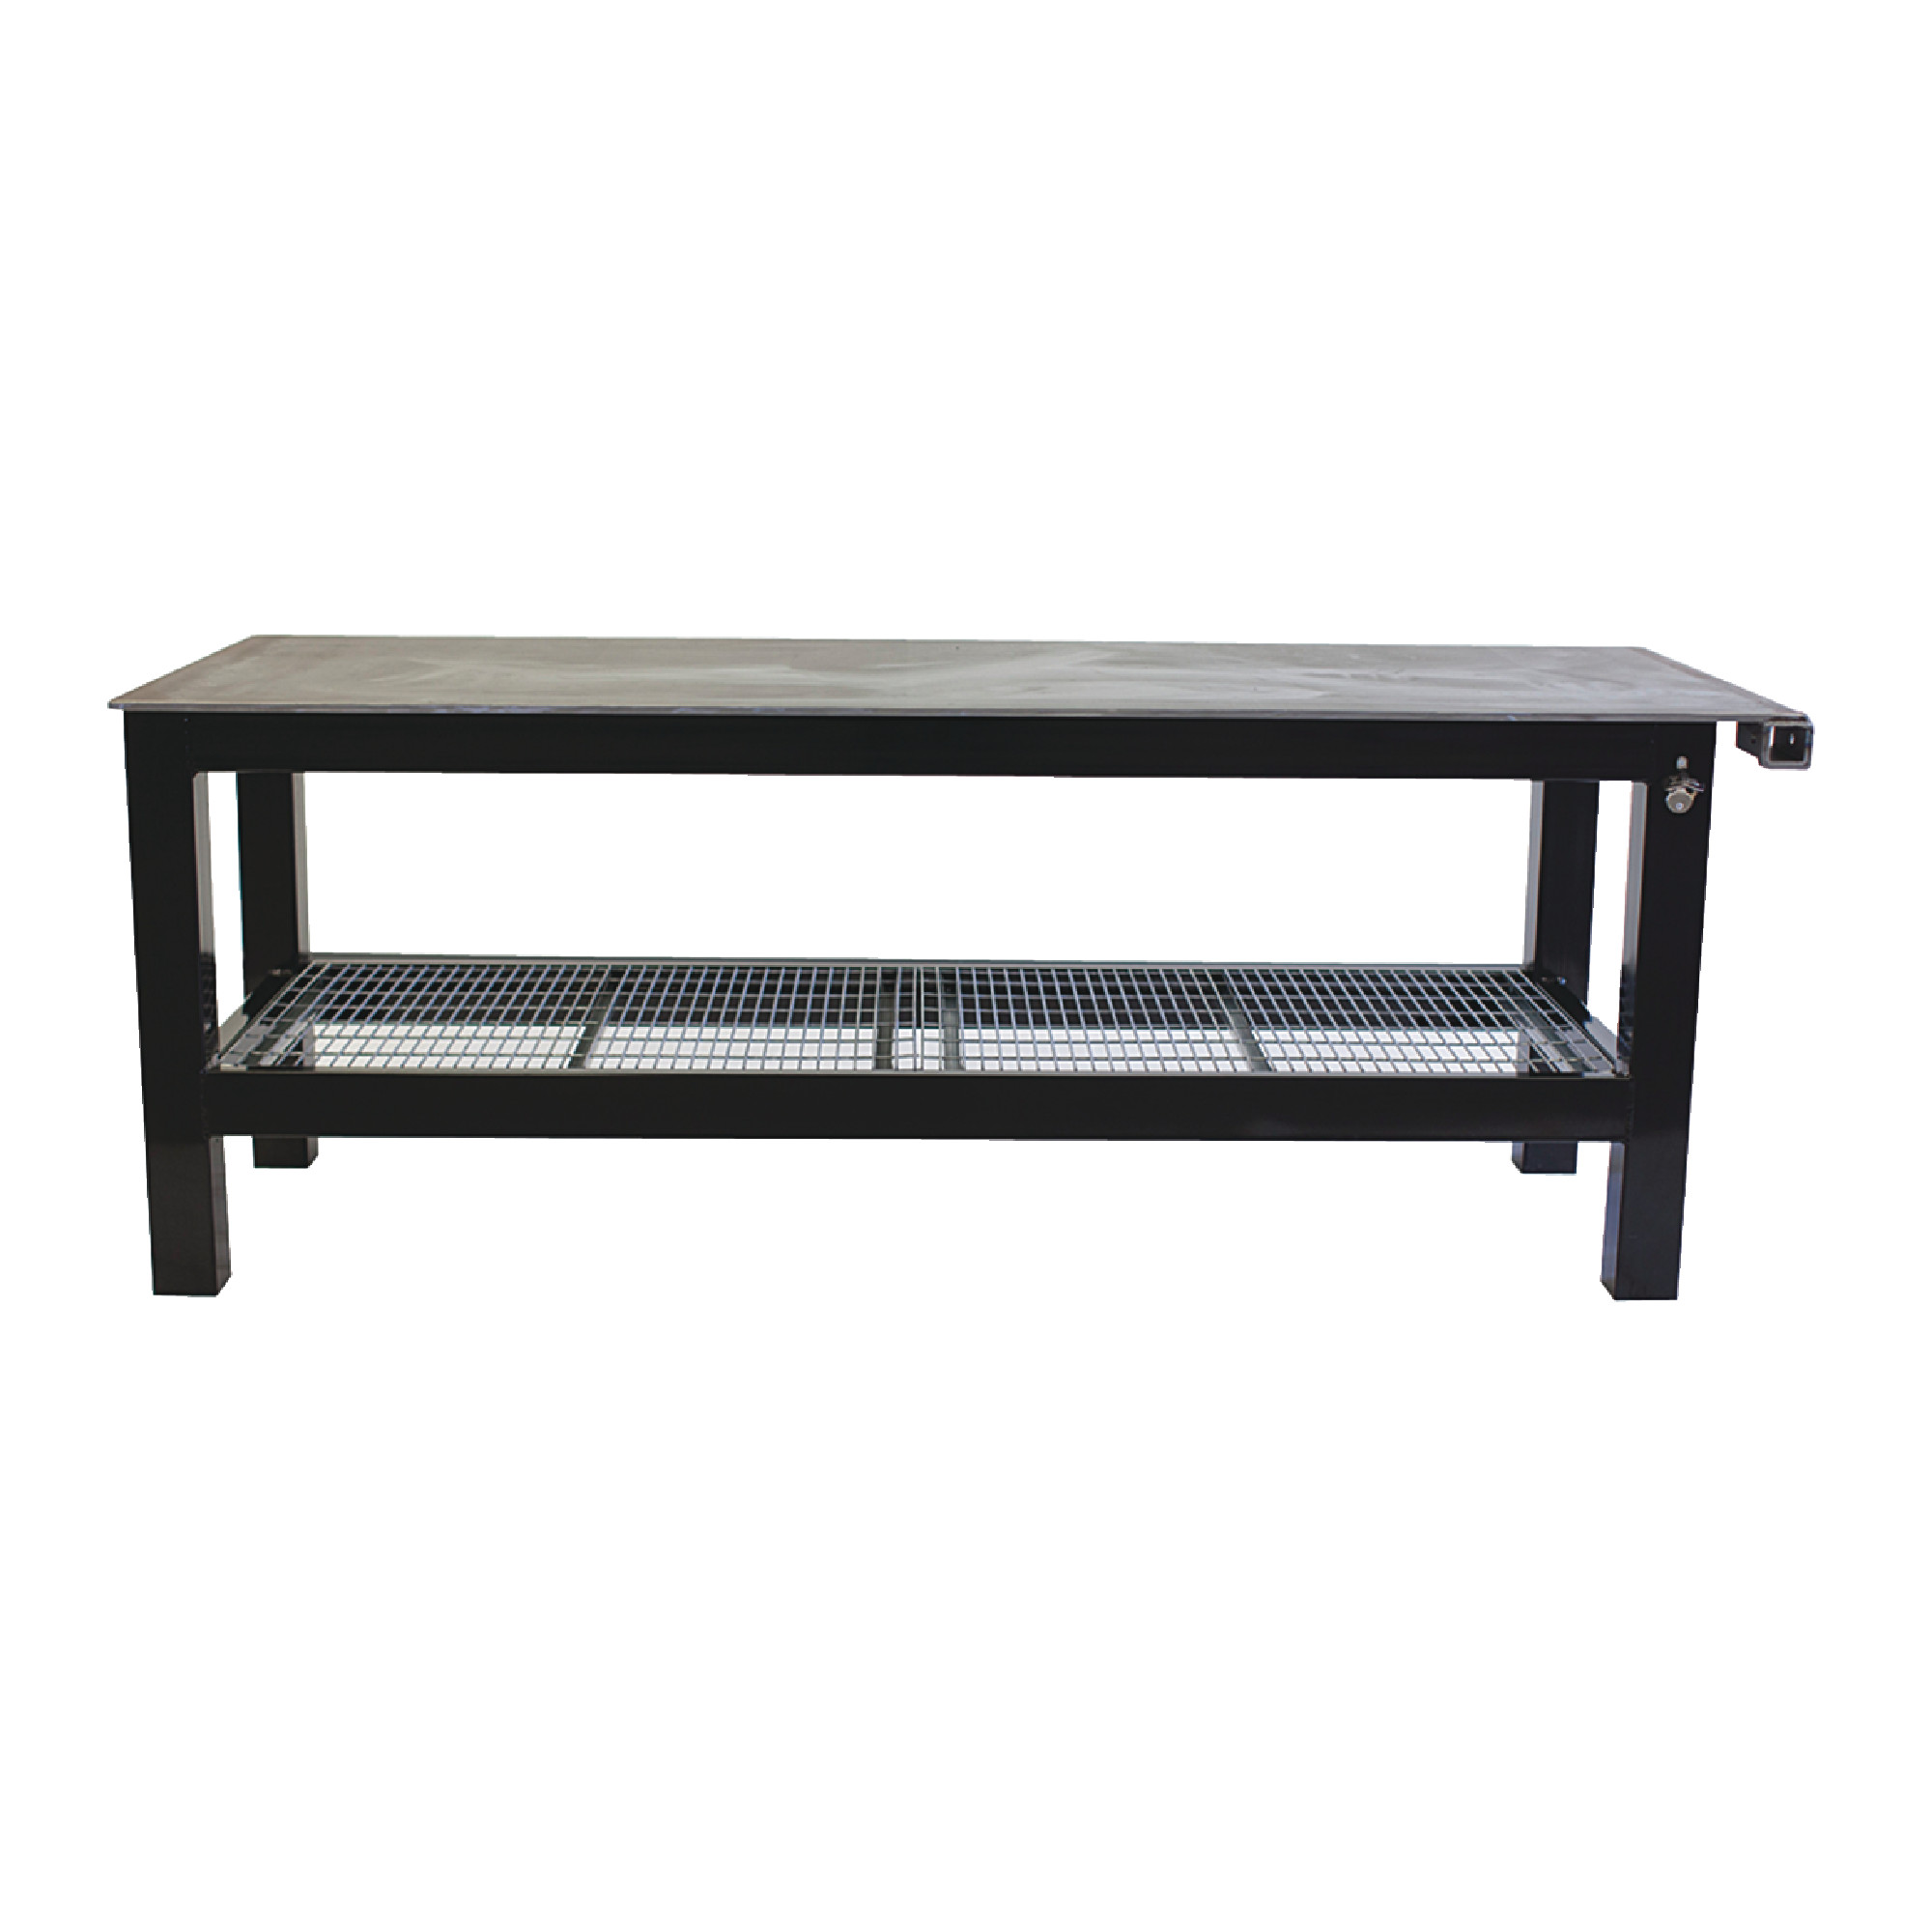 Welding Table With 3/8" Plate Steel Top